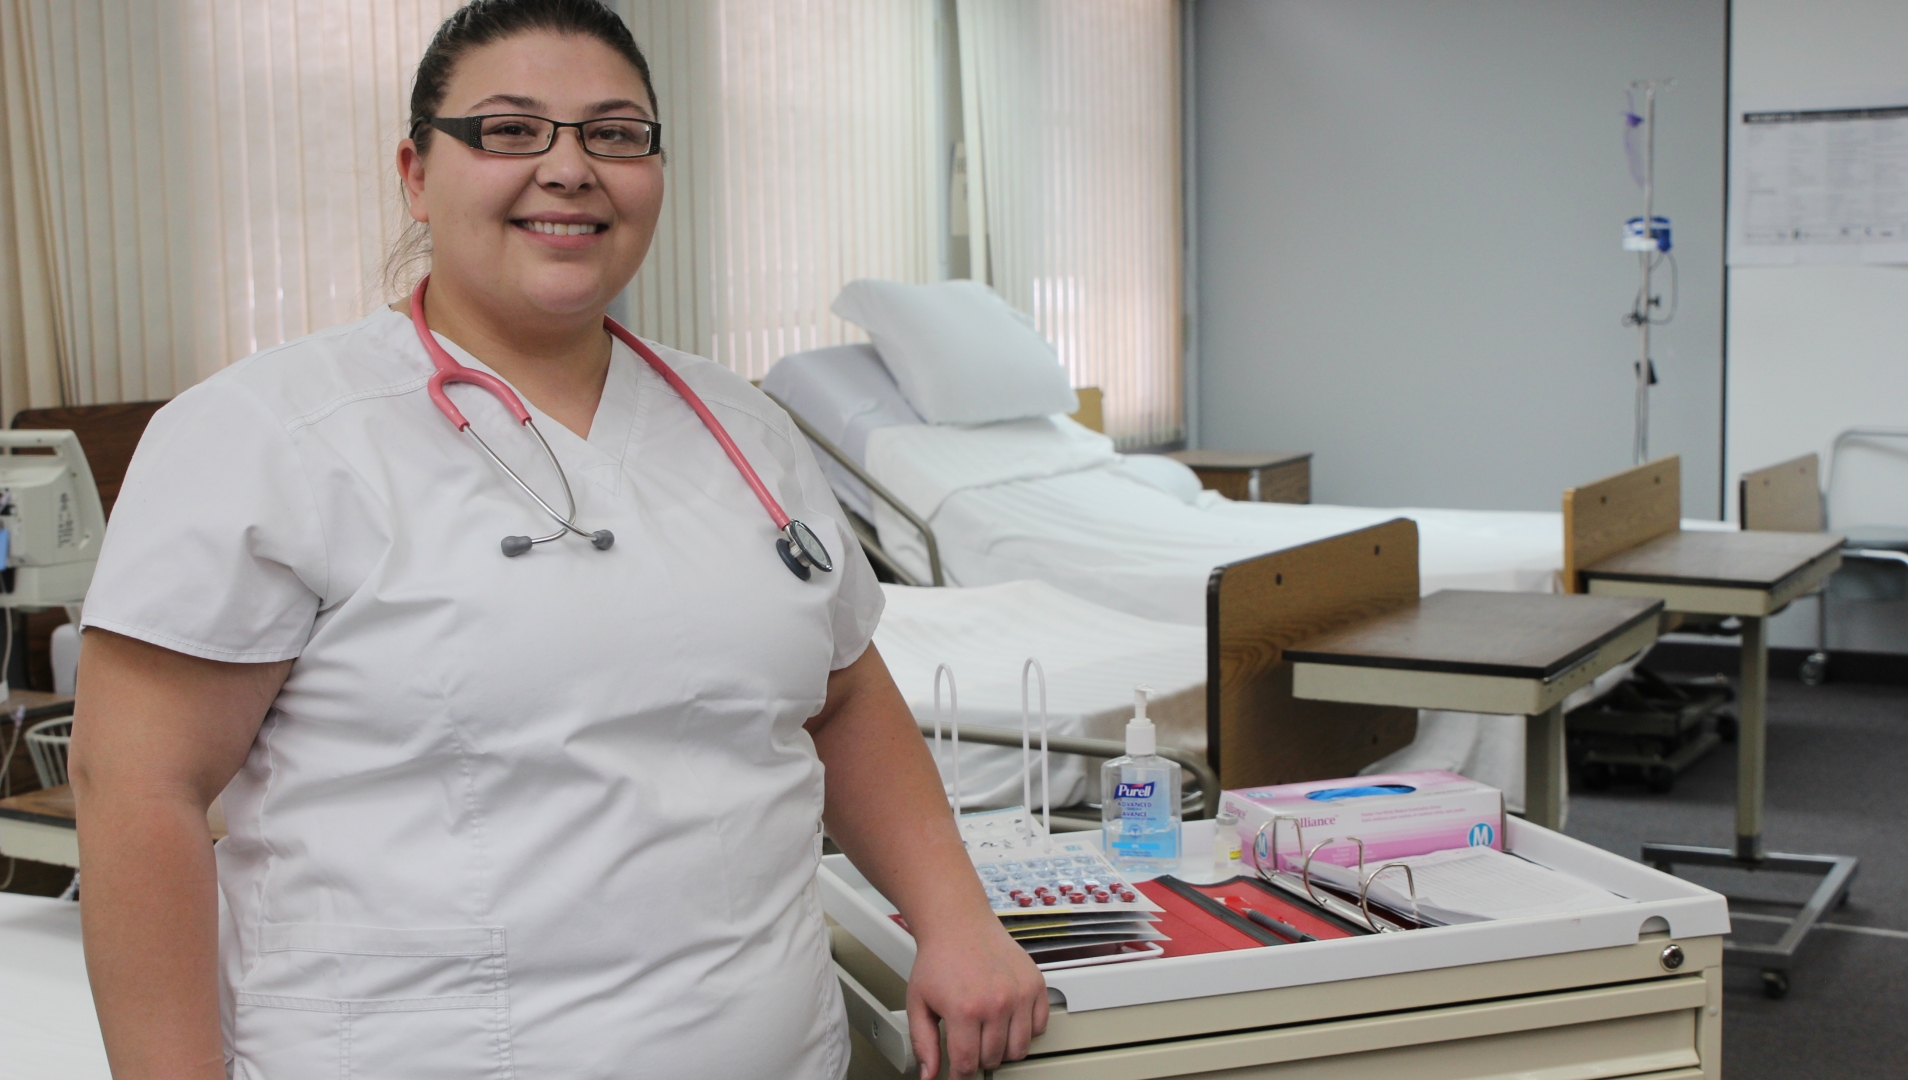 A nursing student stand in the foreground, in the left of the frame. Behind her are training beds and equipment.